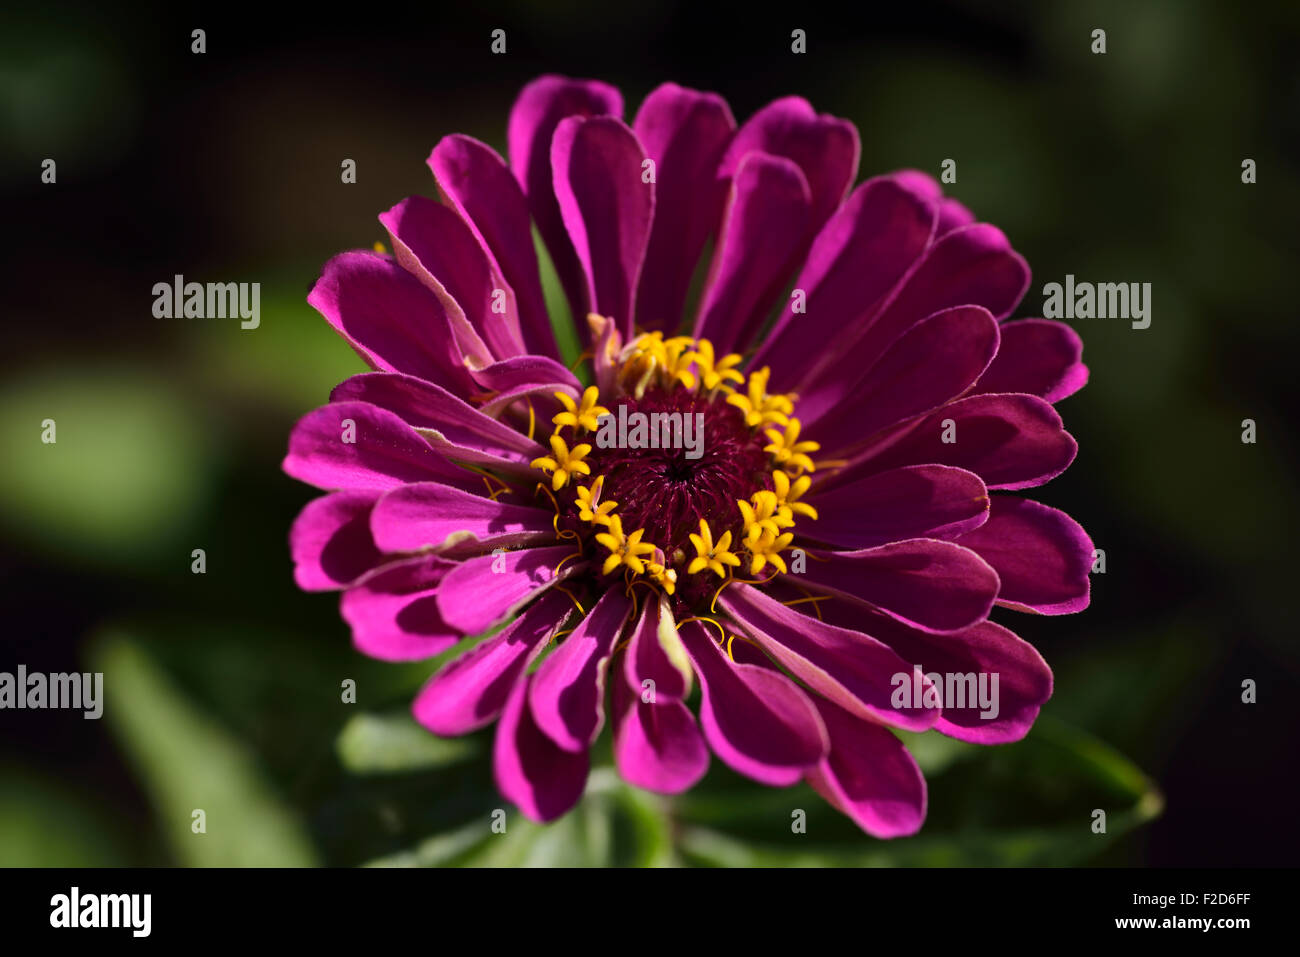 Yellow disk florets and pink ray florets of a single Zinnia flower head Stock Photo